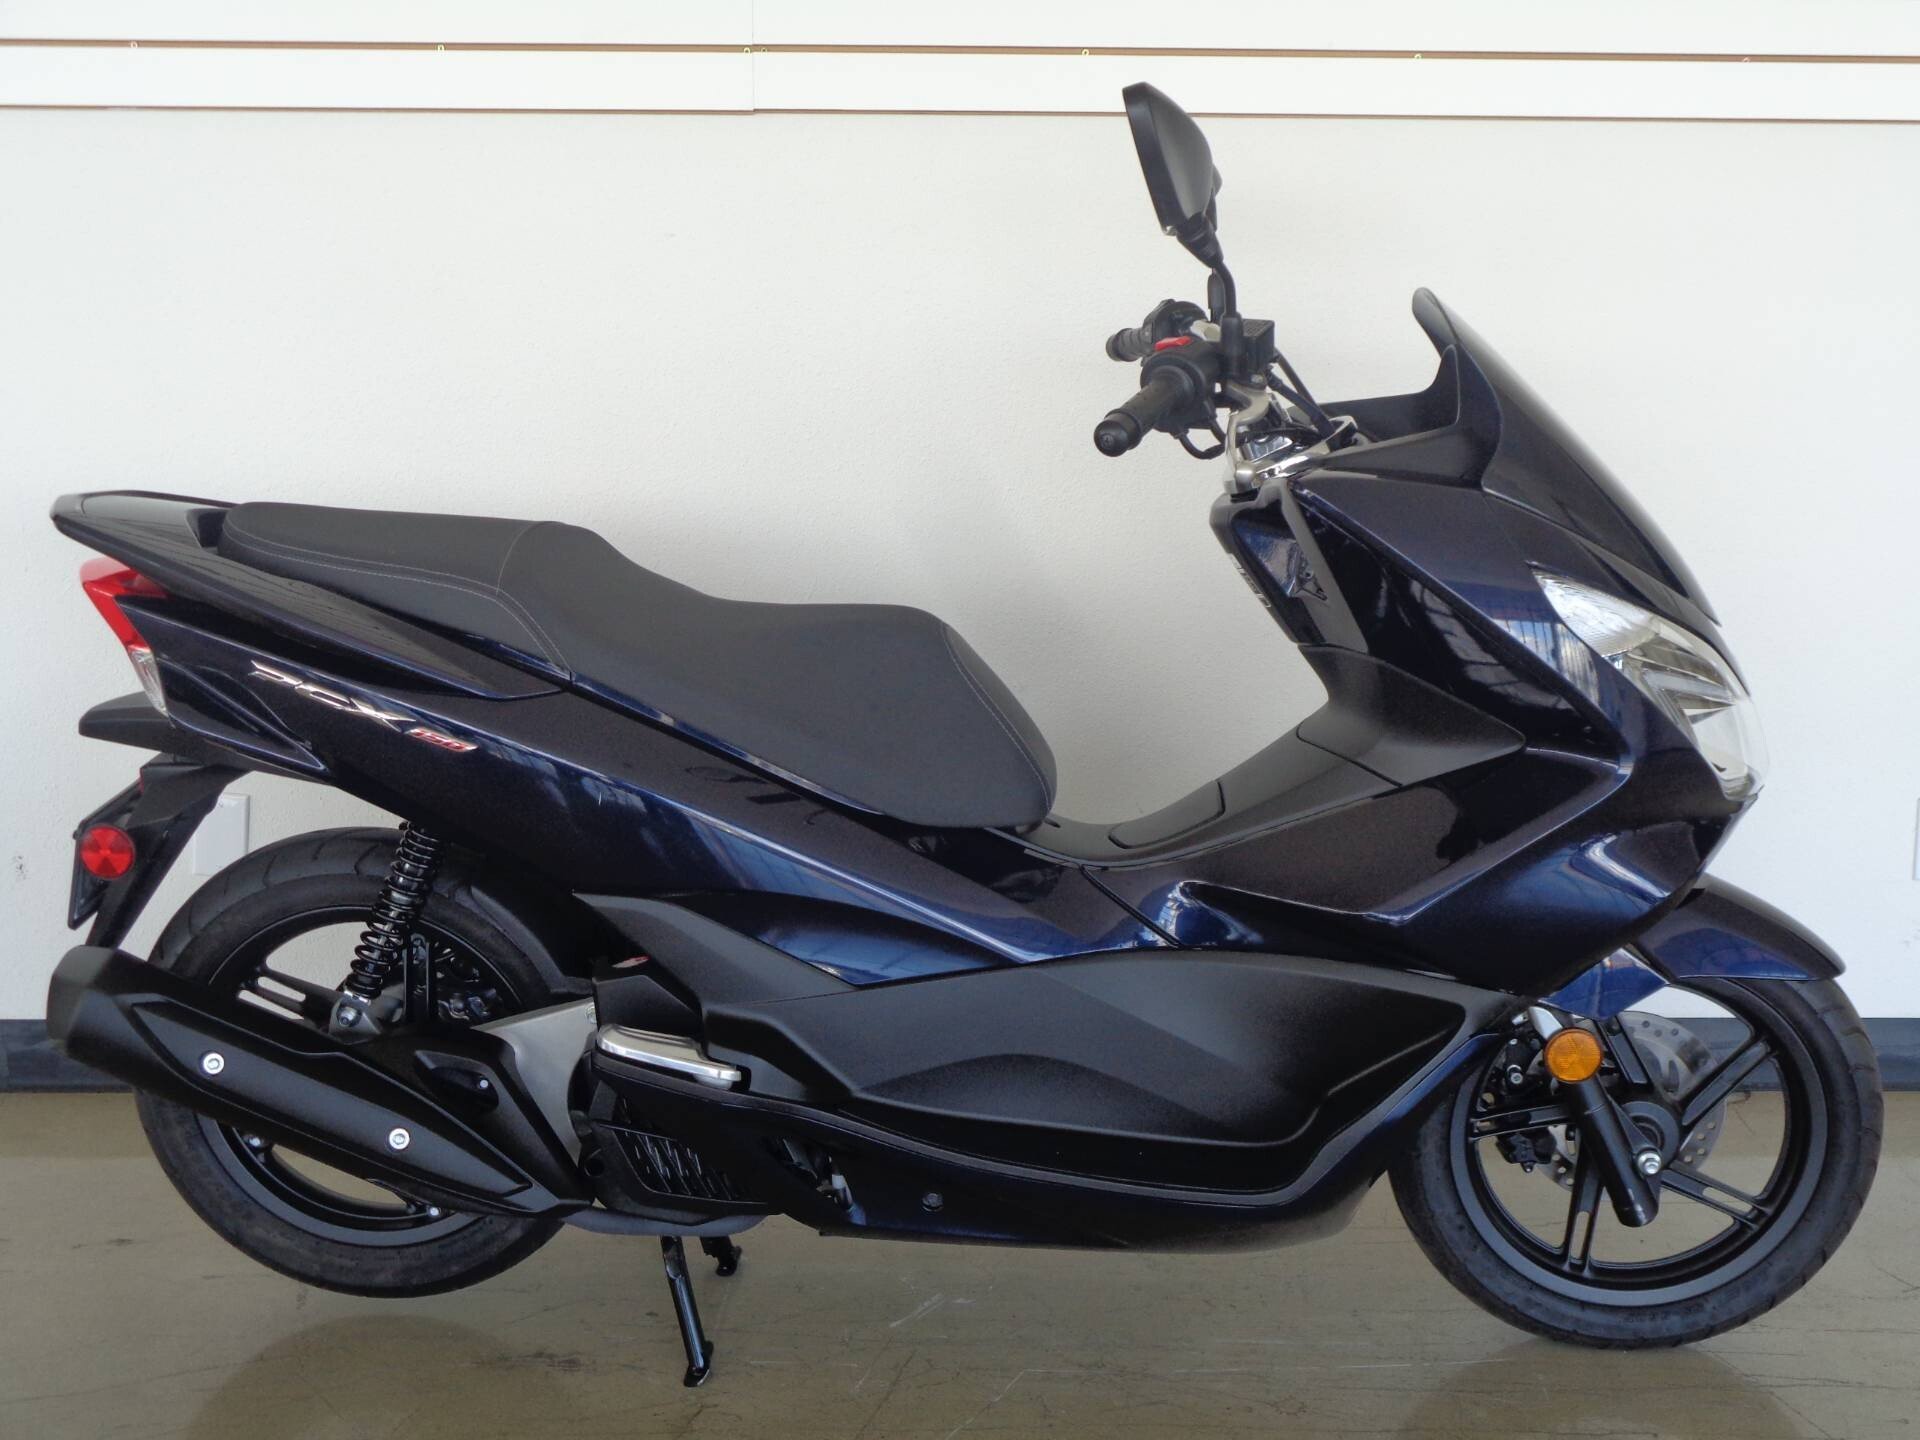 2017 Honda Pcx150 Motorcycles For Sale Motorcycles On Autotrader